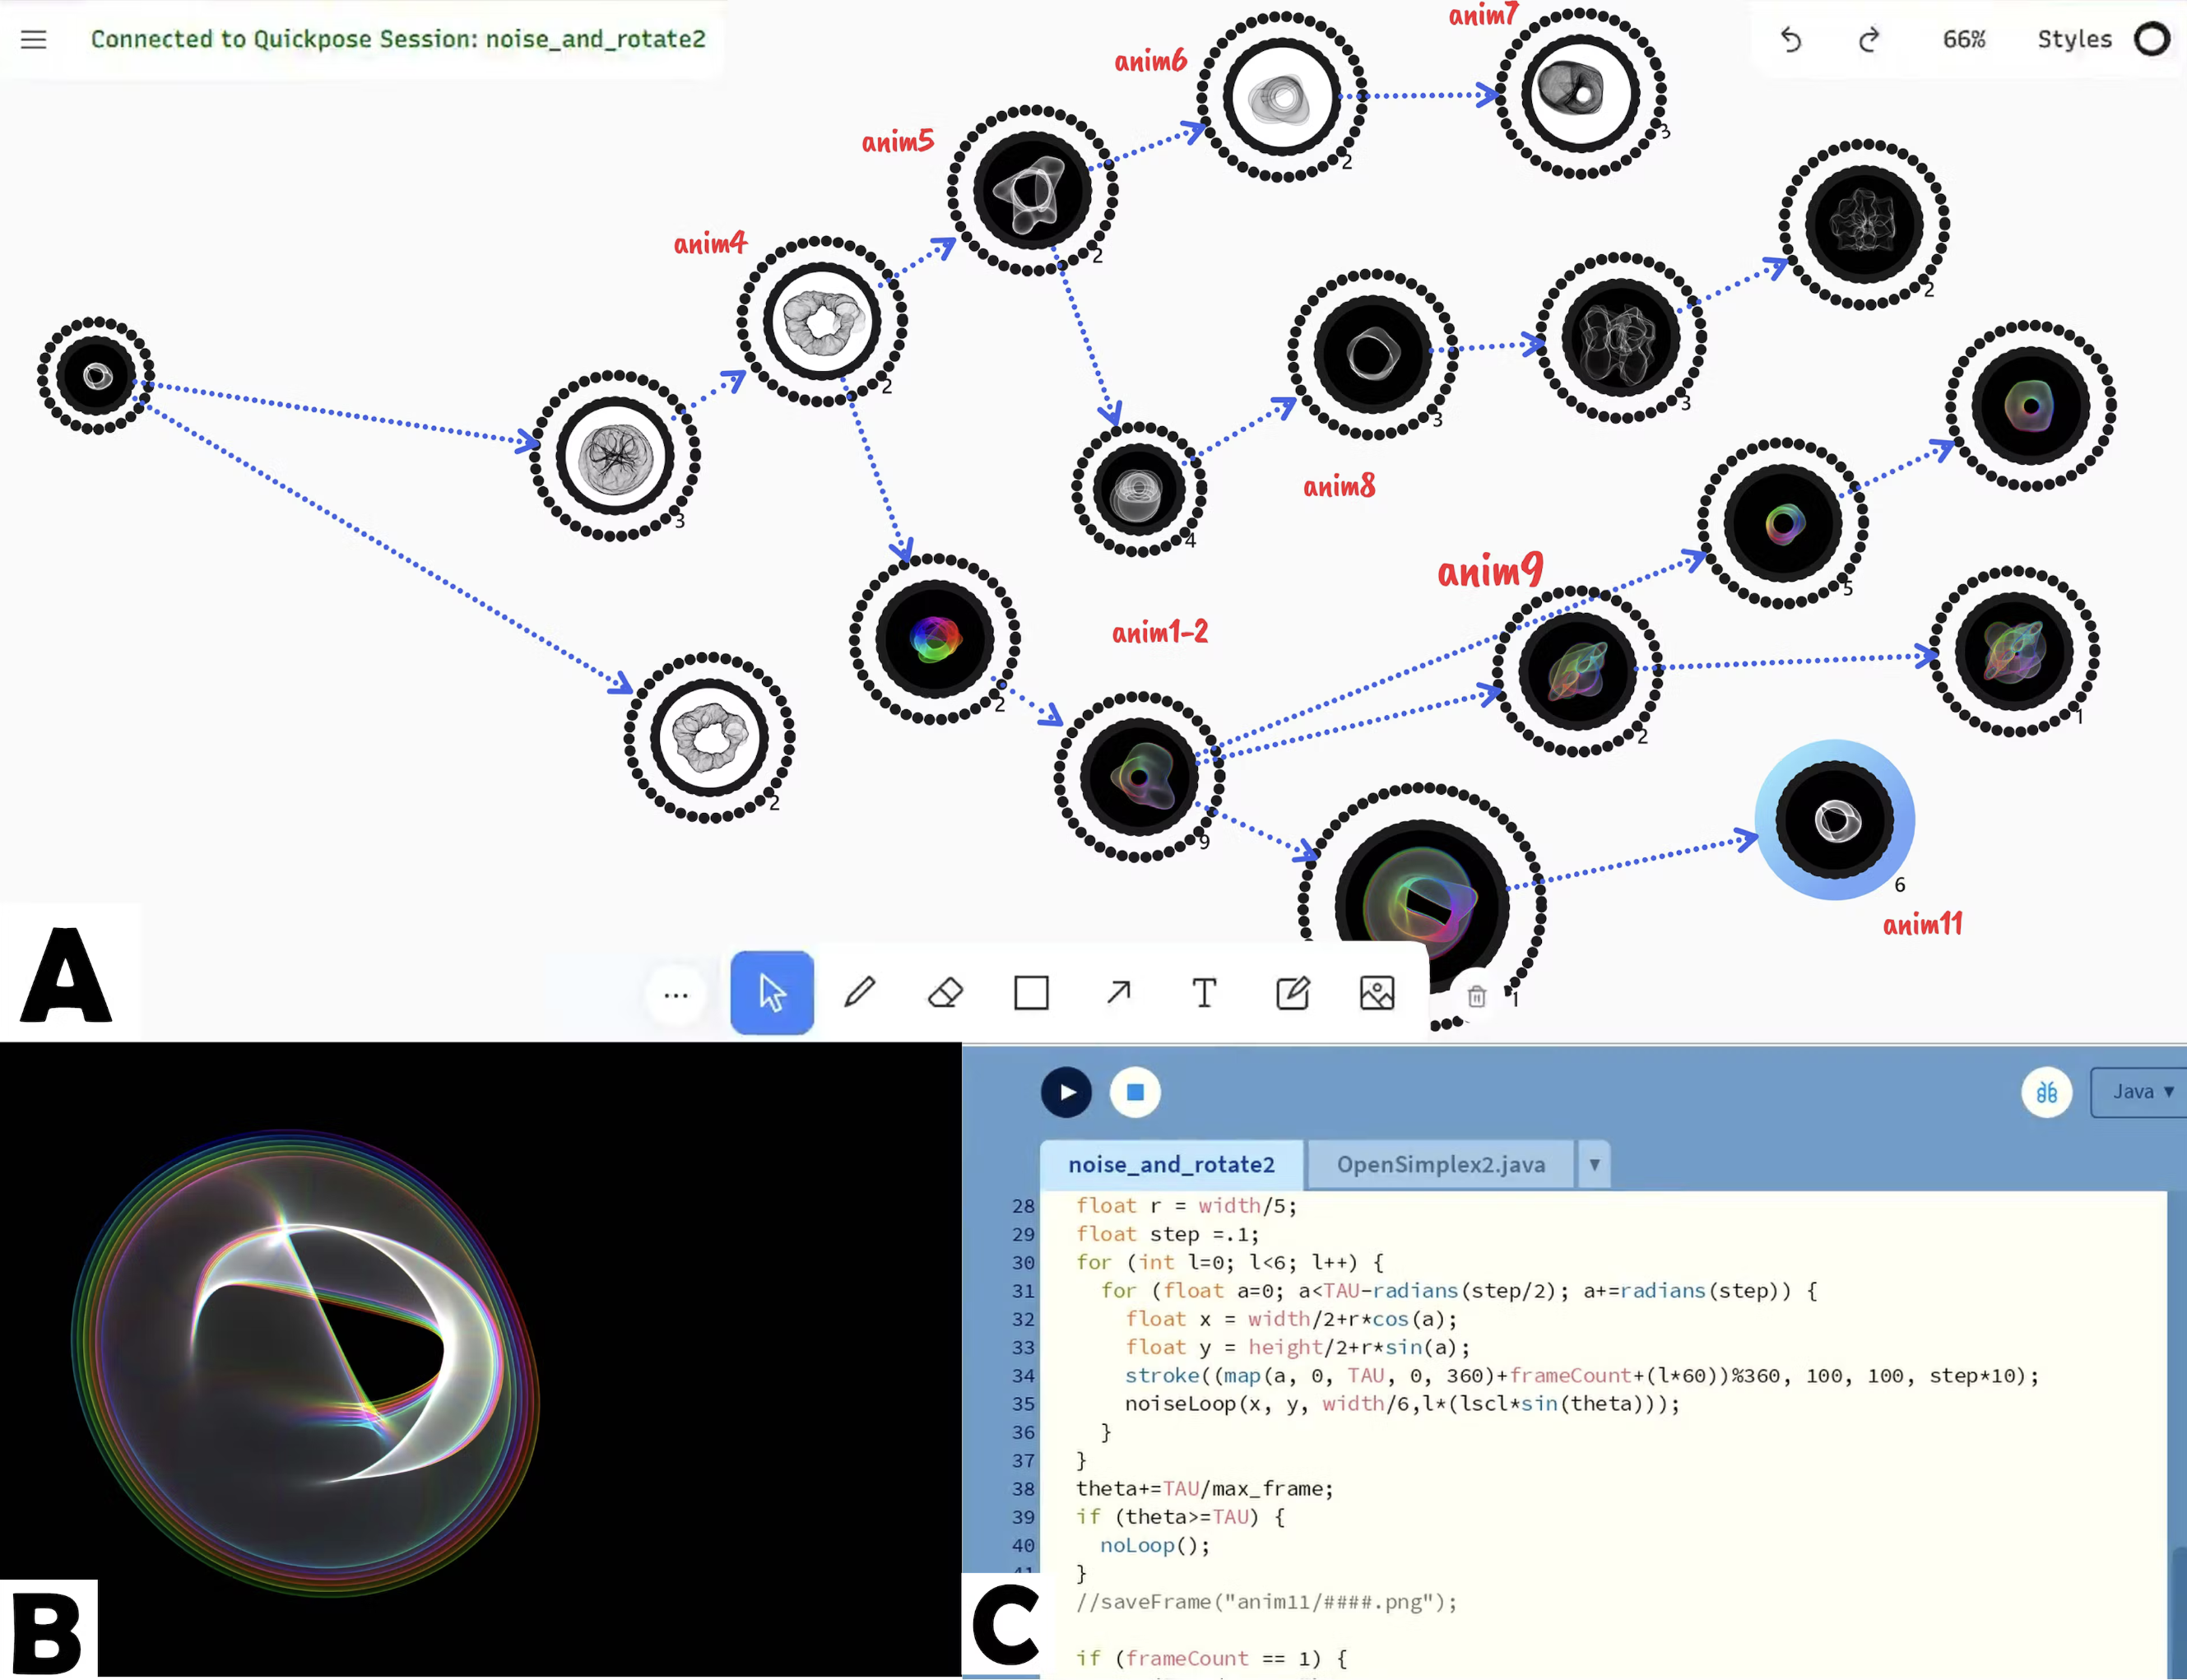 A screenshot of the Quickpose app, which shows a graph in which different versions of an artwork are nodes.